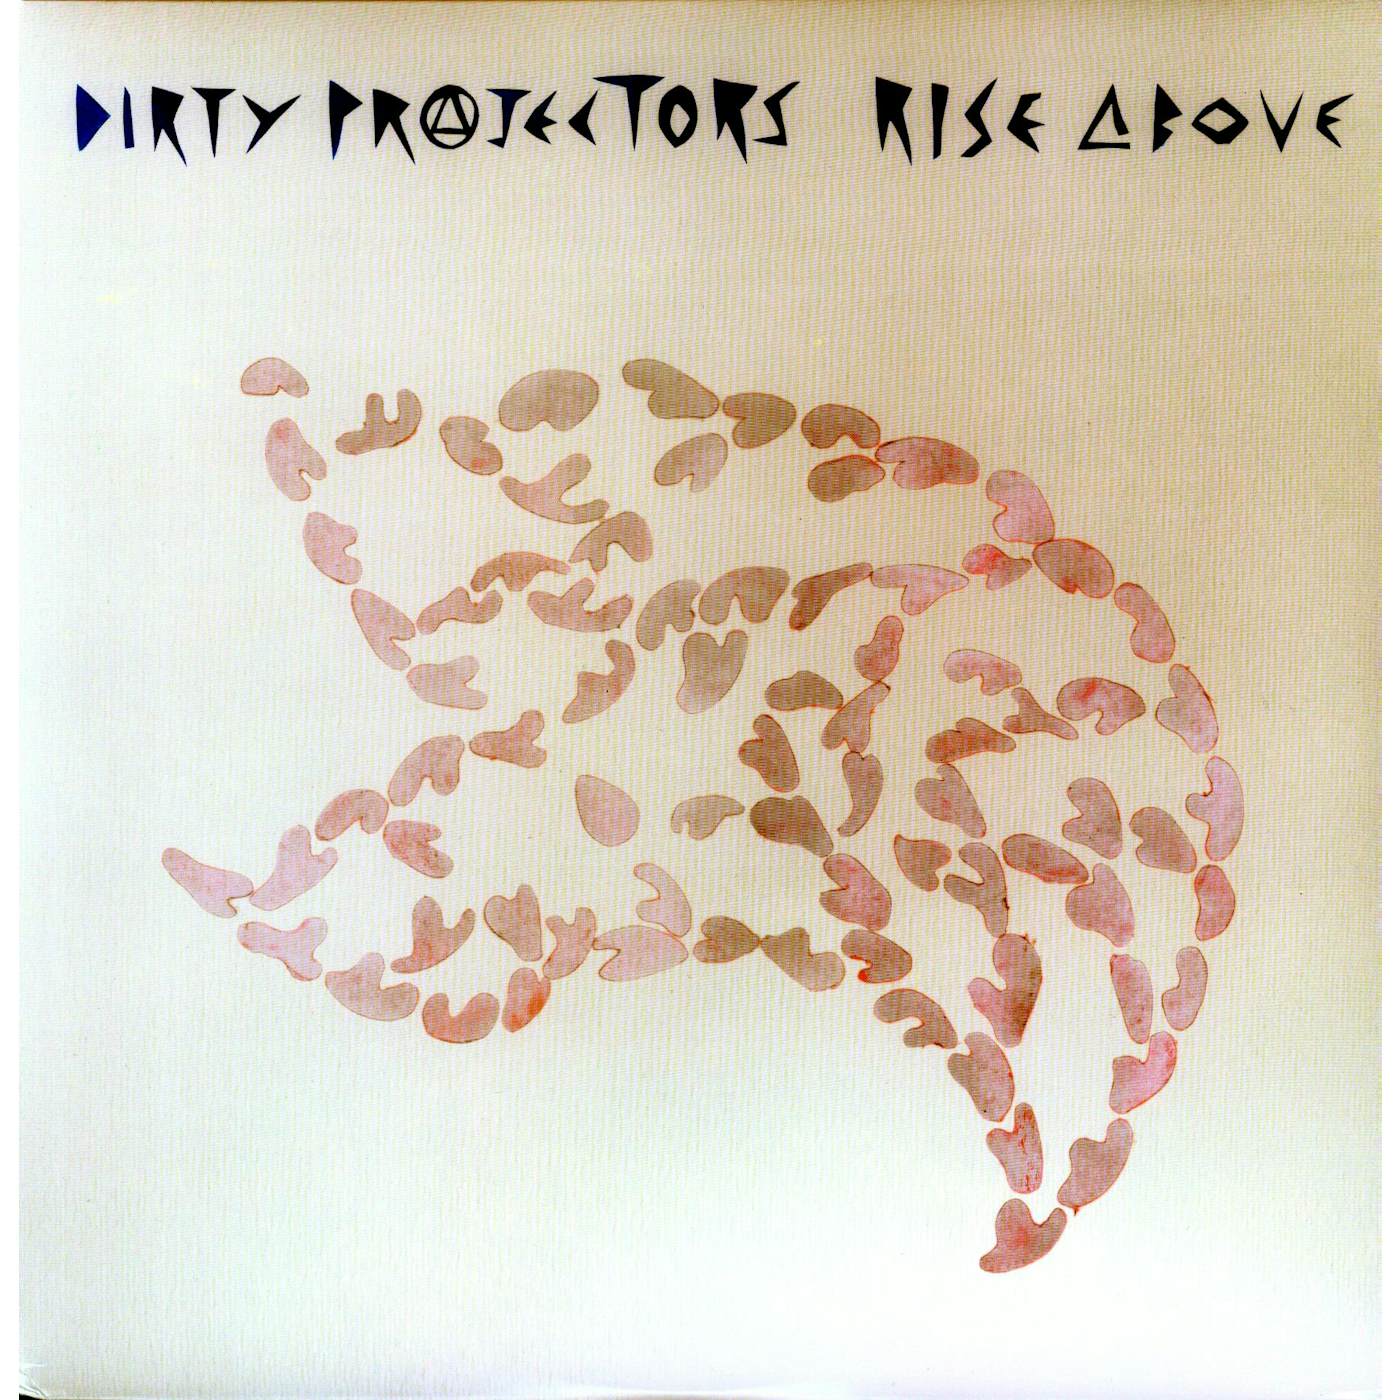 Dirty Projectors Rise Above Vinyl Record